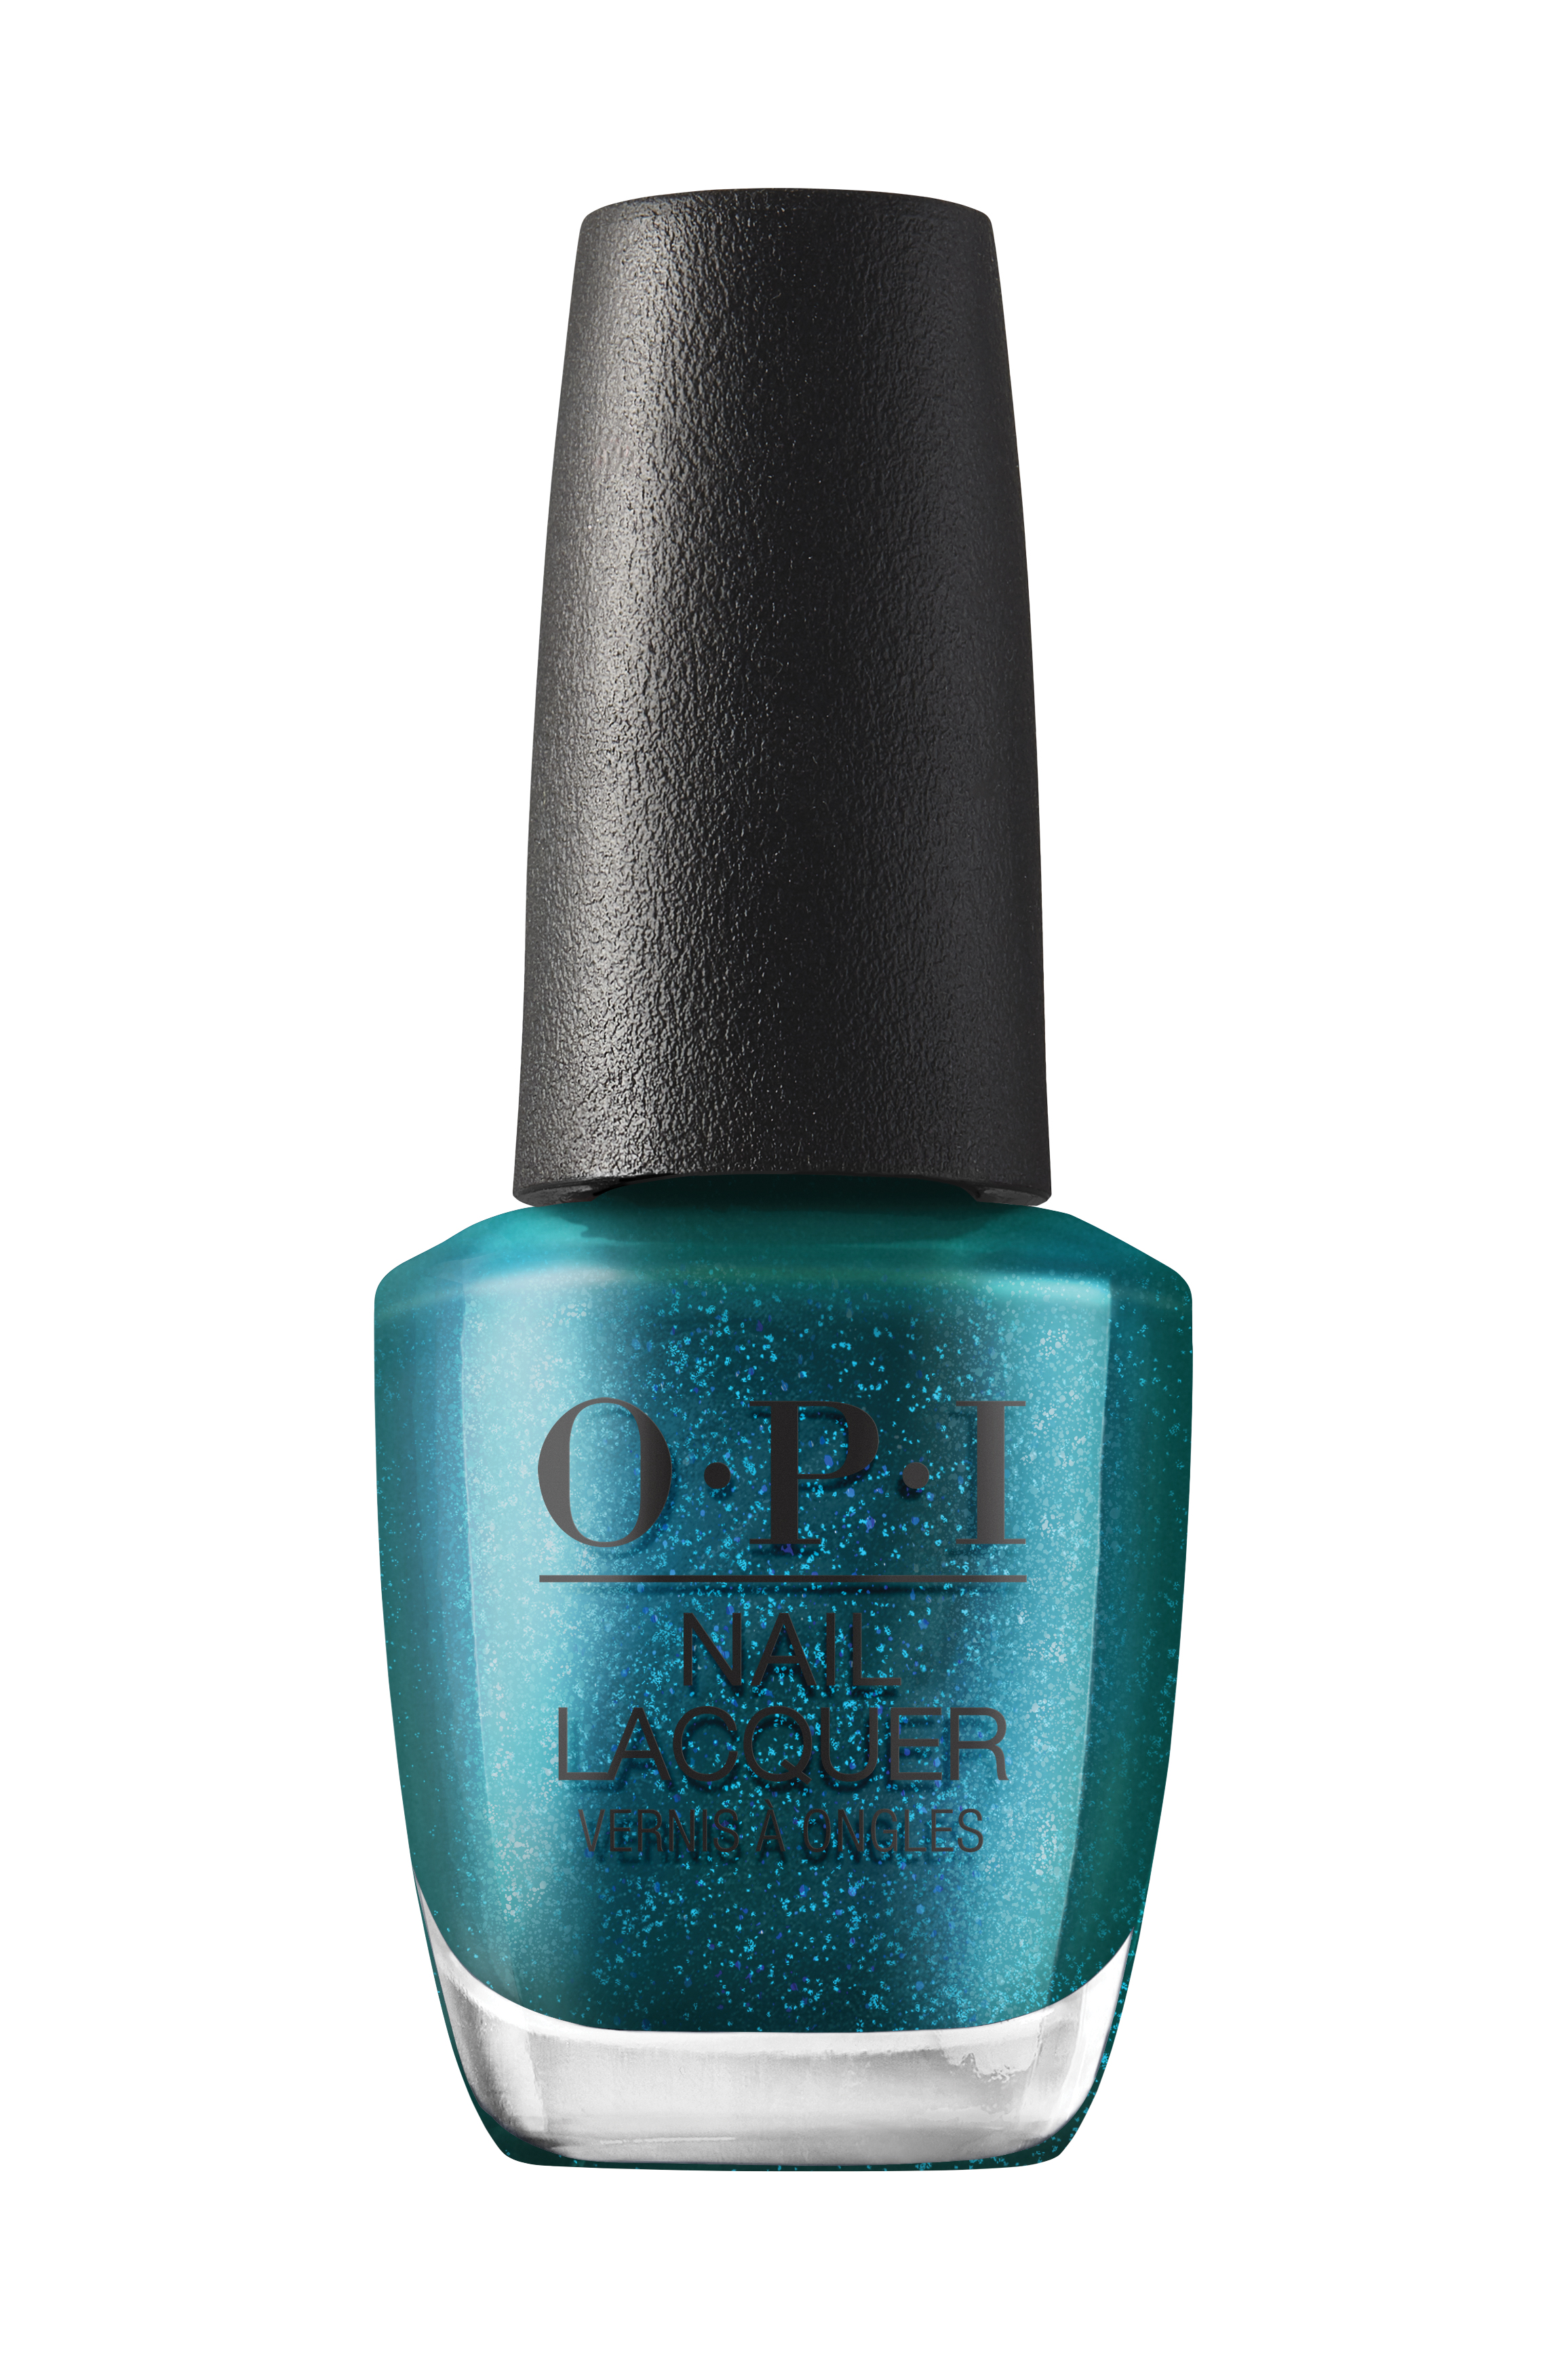 4064665105216 - OPI NAIL LACQUER, OPAQUE SHIMMER FINISH BLUE NAIL POLISH, UP TO 7 DAYS OF WEAR, CHIP RESISTANT & FAST DRYING, HOLIDAY 2023 COLLECTION, TERRIBLY NICE, LETS SCROOGE, 0.5 FL OZ